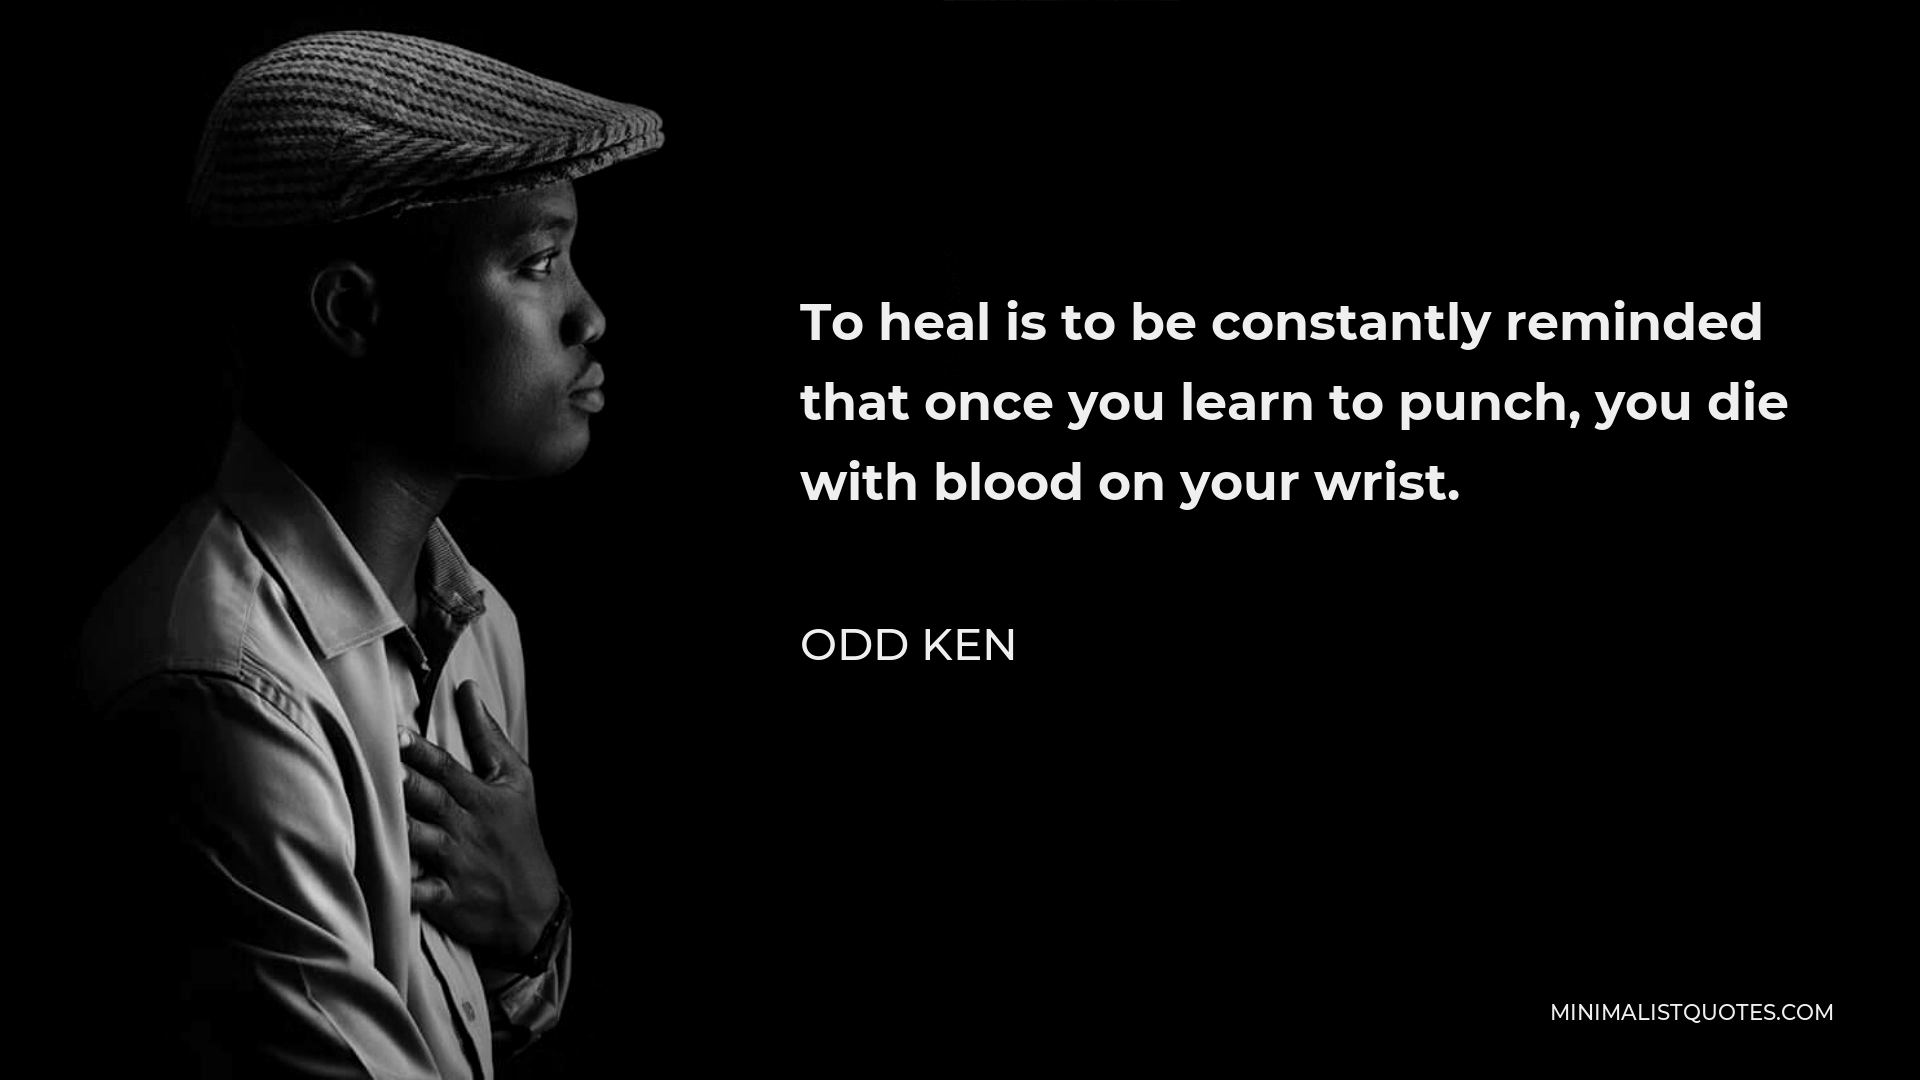 Odd Ken Quote - To heal is to be constantly reminded that once you learn to punch, you die with blood on your wrist.